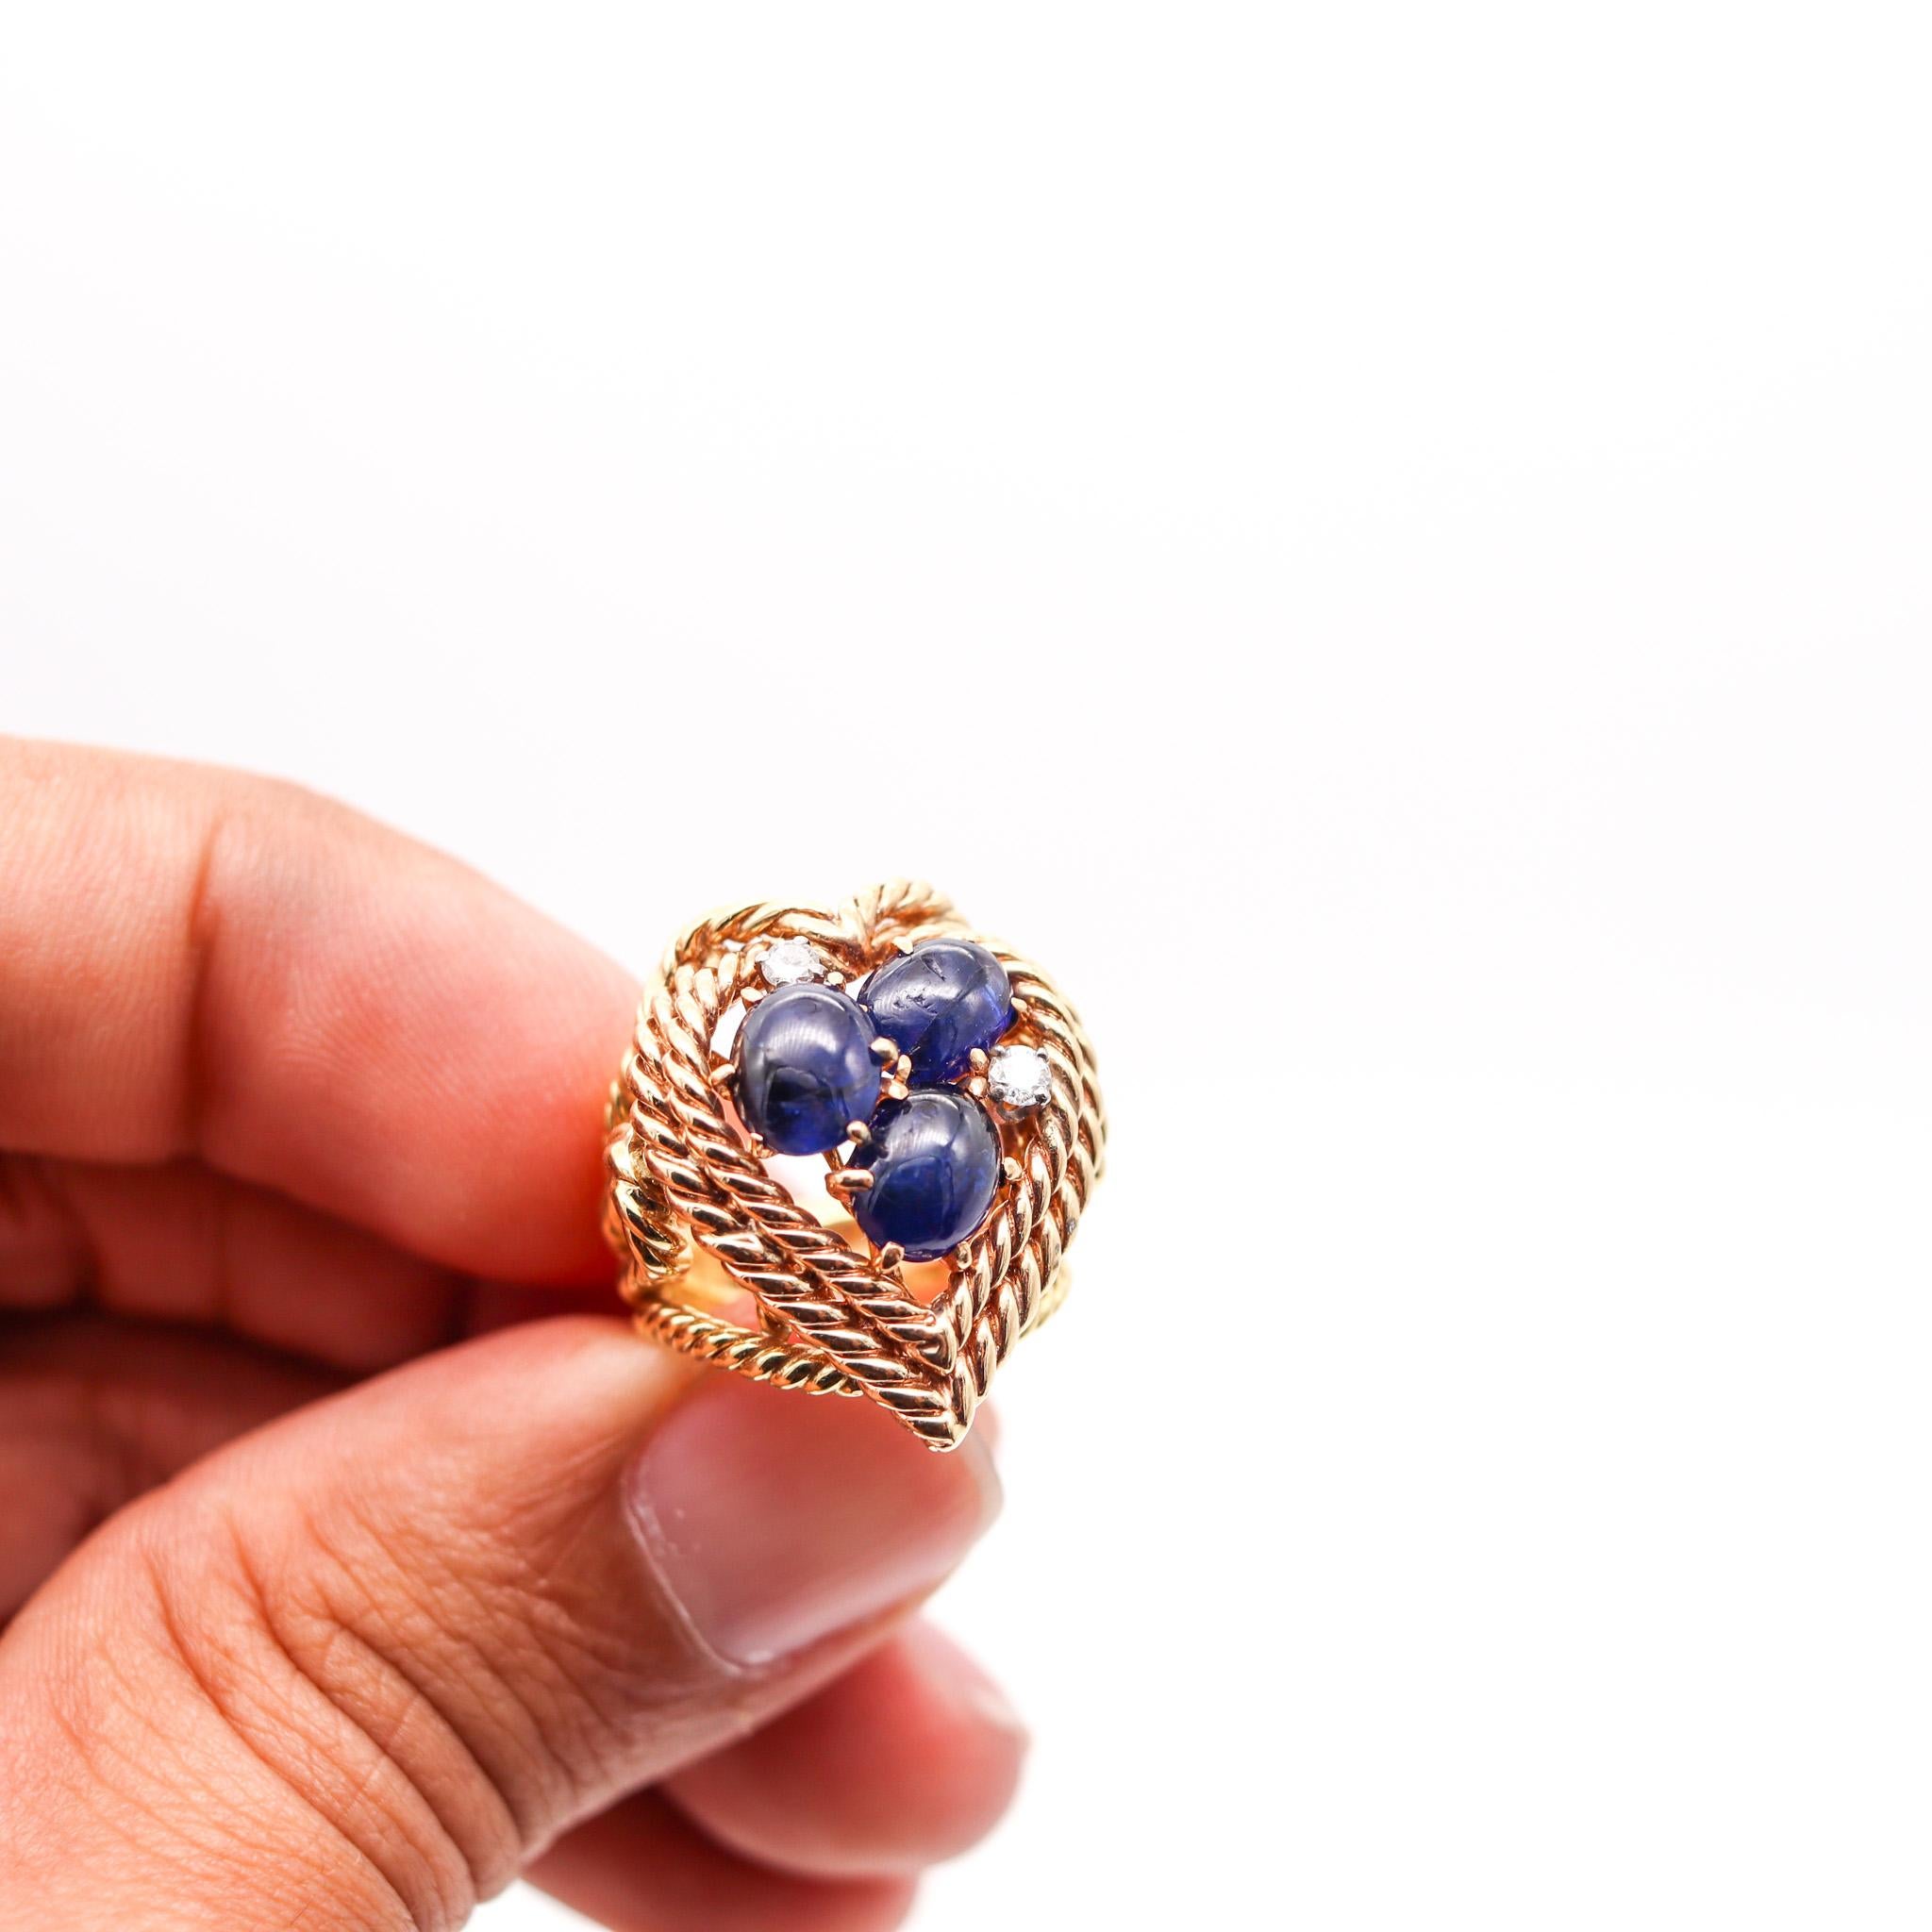 Women's Retro Mid Century Cocktail Ring In 18Kt Gold With 5.56 Ctw Sapphires And Diamond For Sale